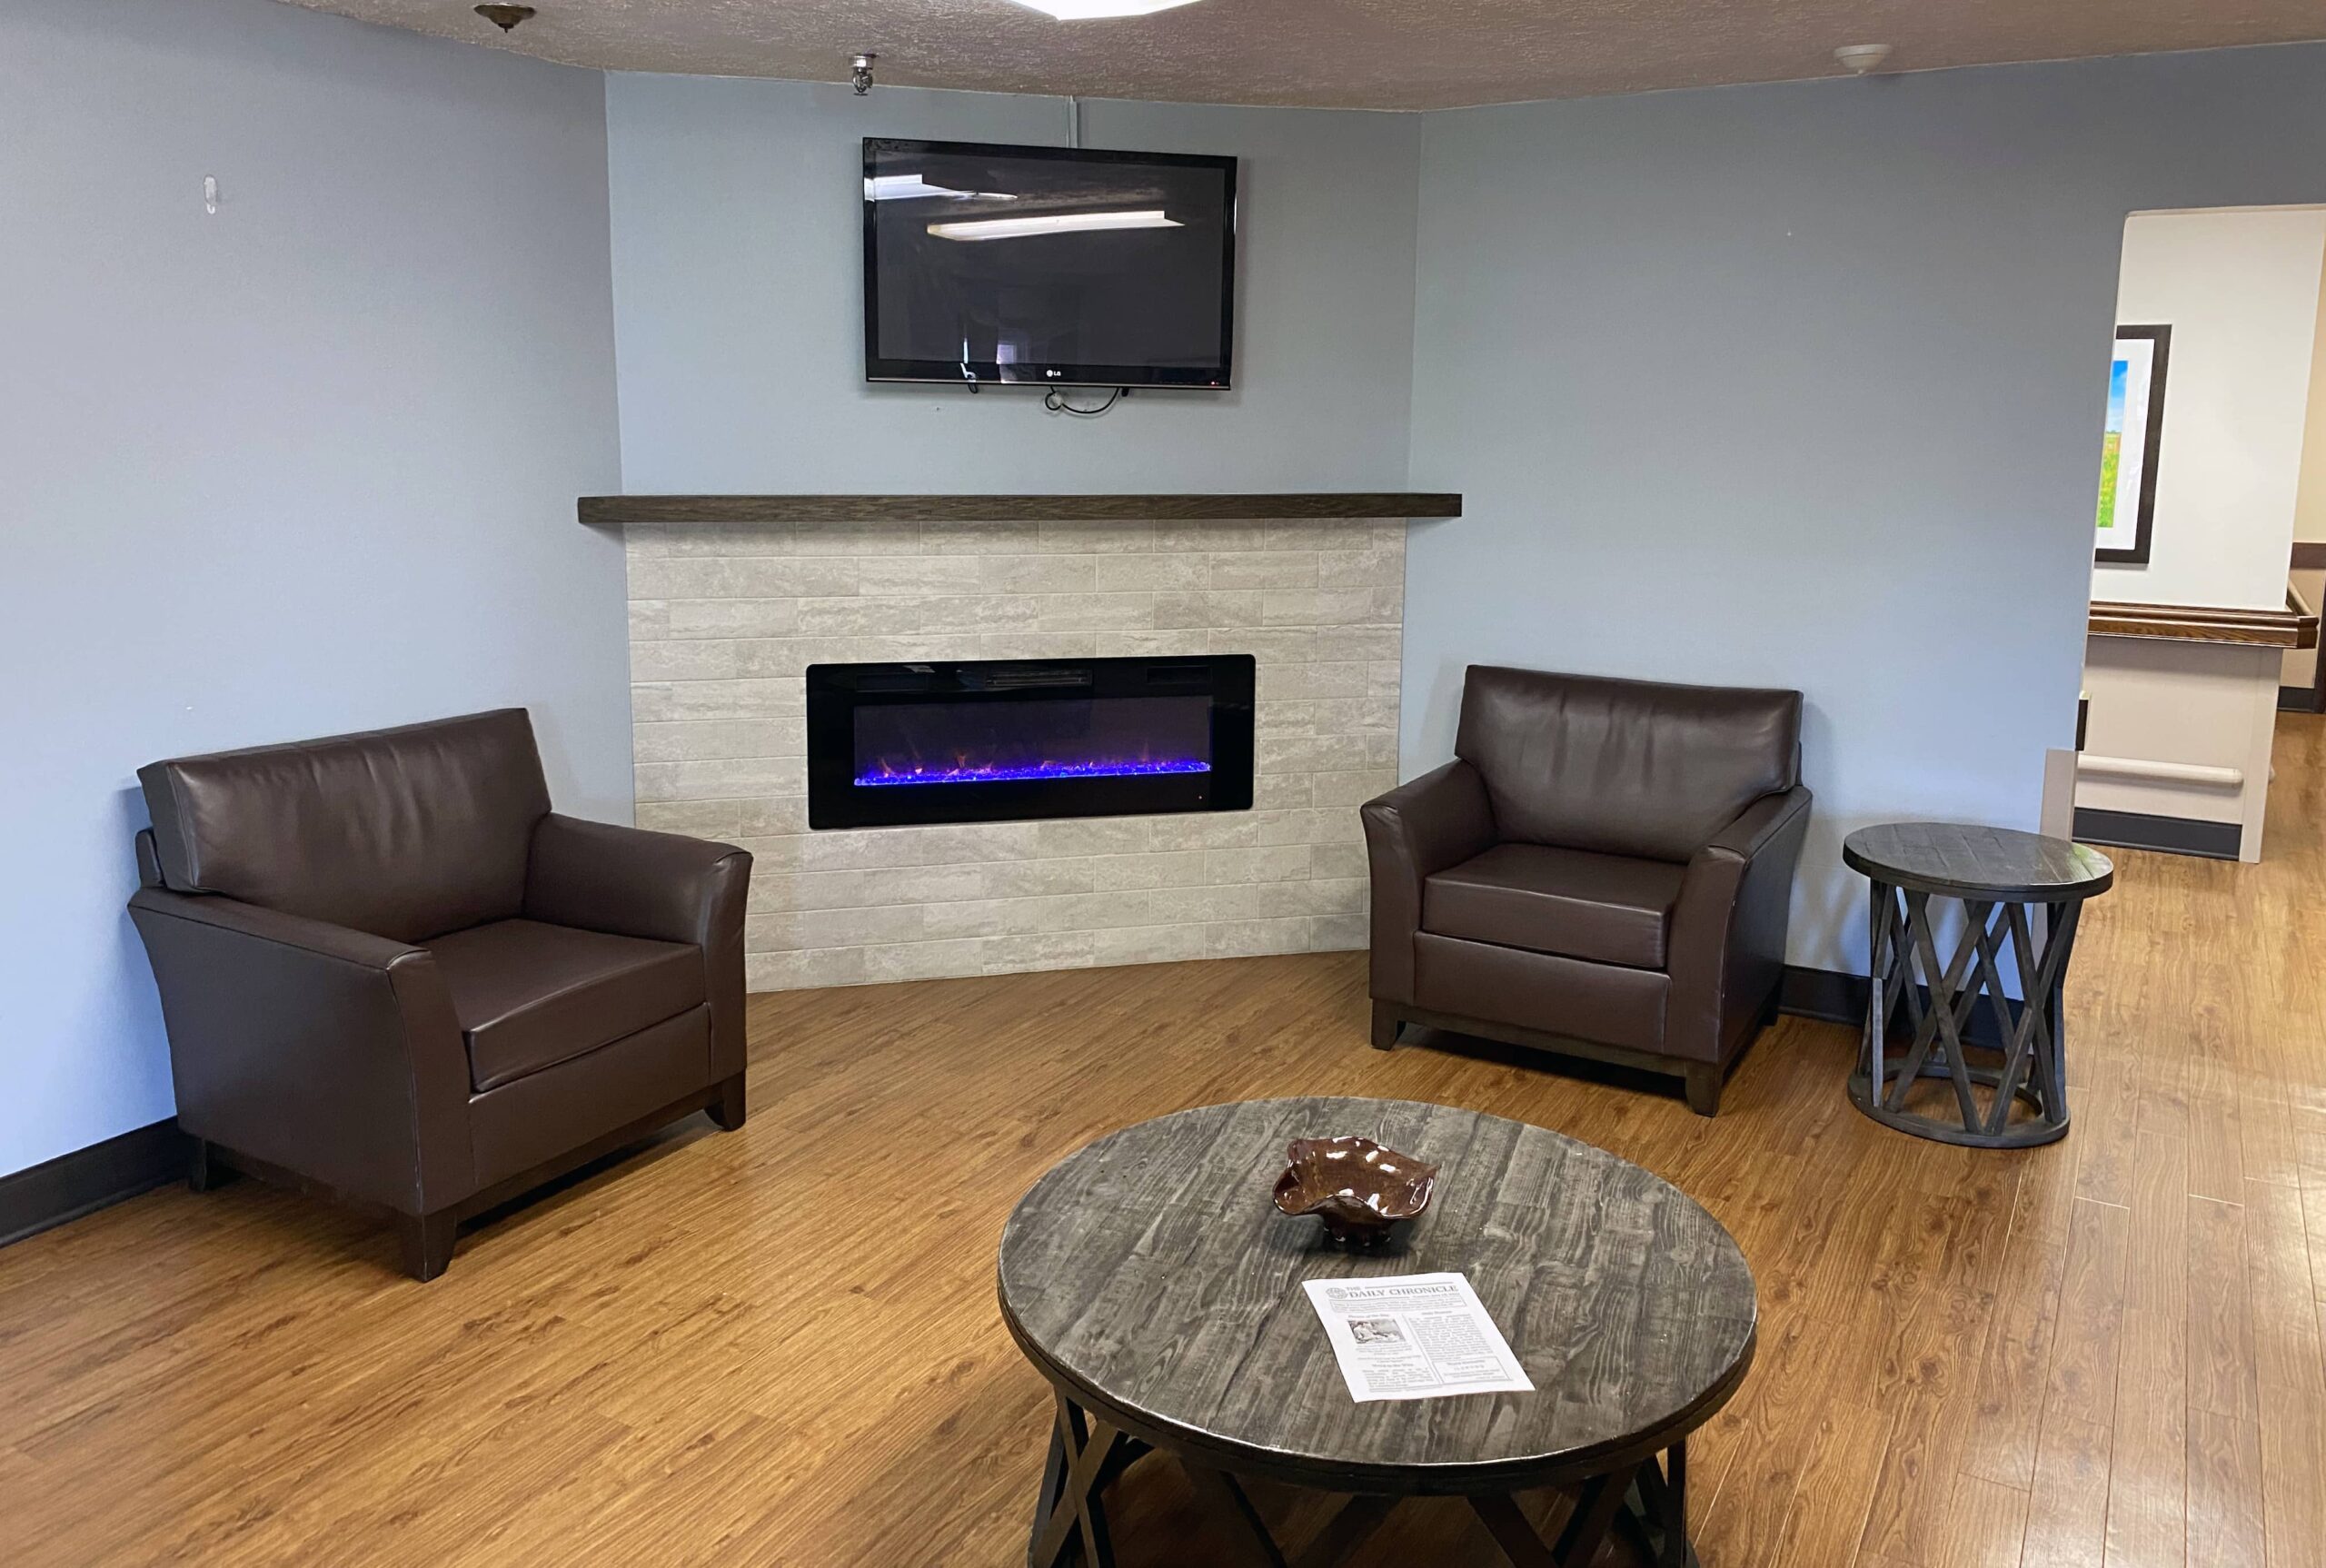 Brickyard Healthcare Churchman Care Center sitting area with fireplace and TV